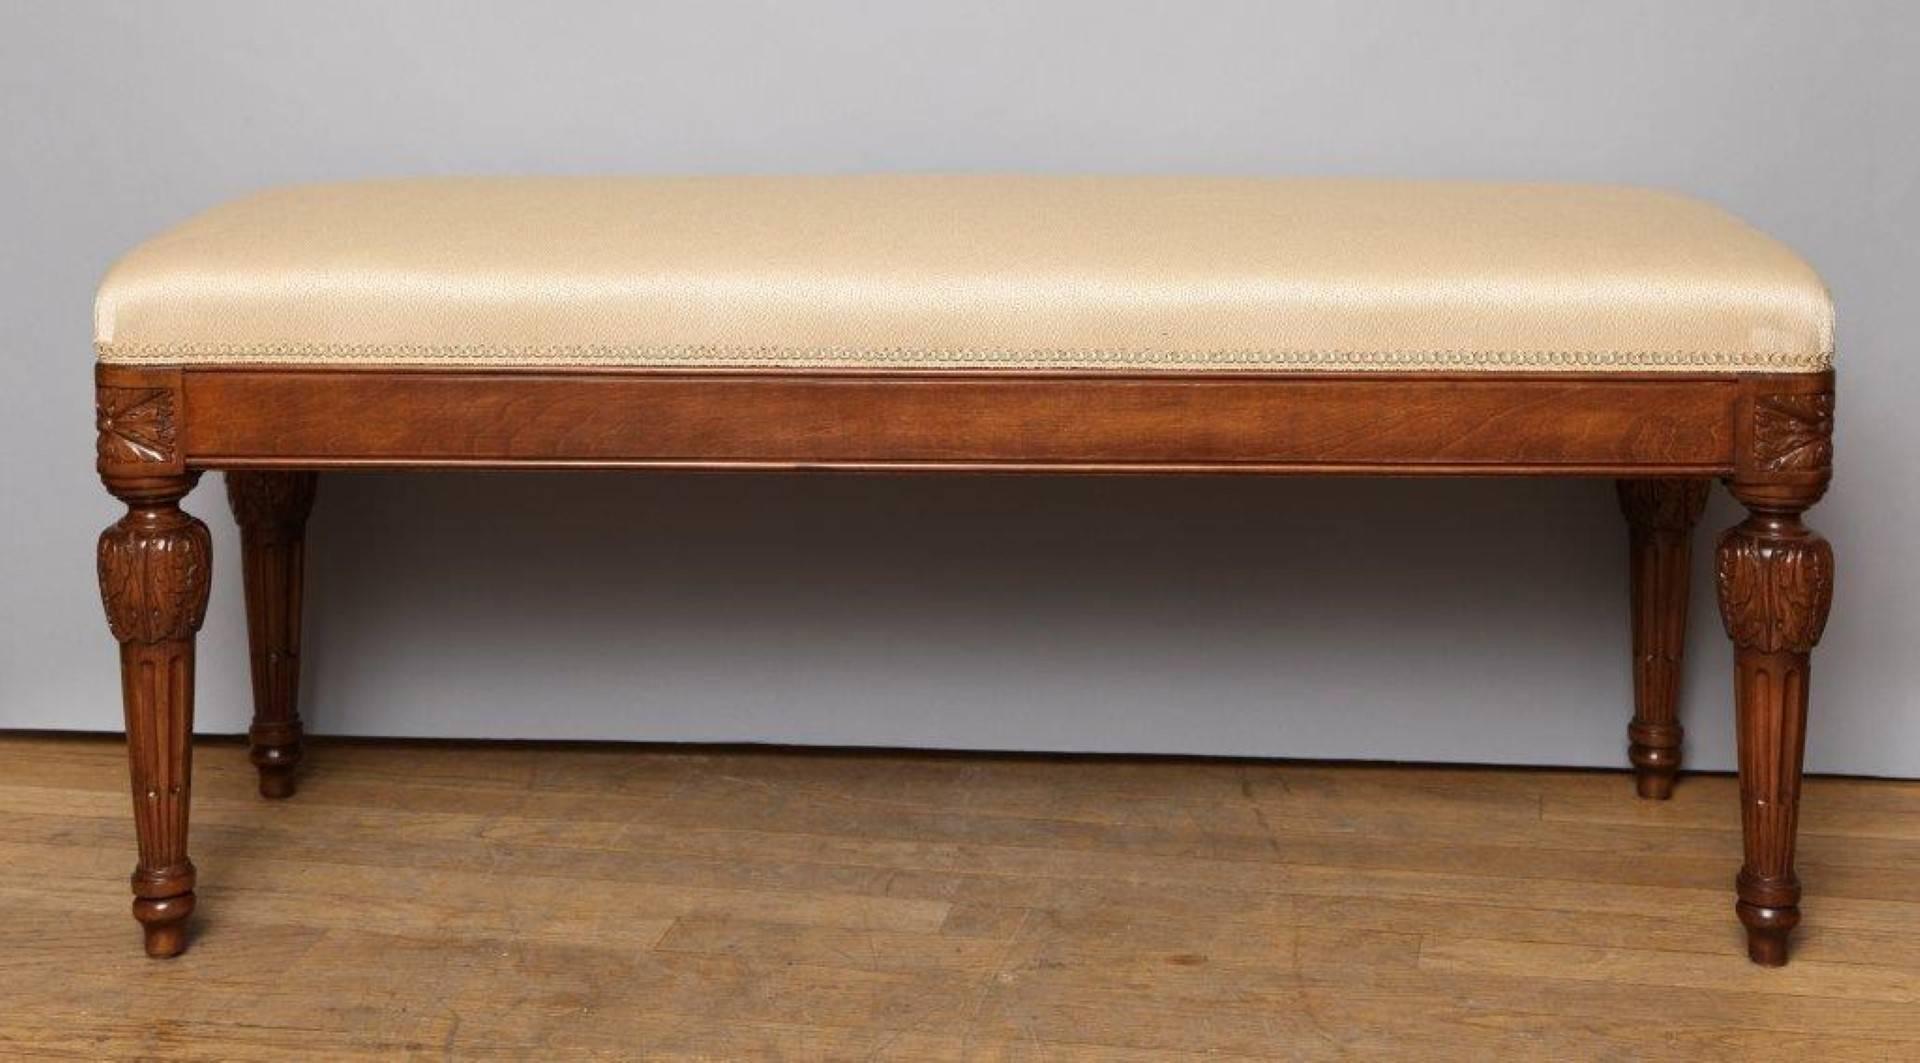 Designed by David Duncan, the Daphne Bench features a maple wood rectangular frame with upholstered seat. With rounded corners having exquisitely detailed, hand carved corner rosettes above round tapering fluted legs. Newly made and readily